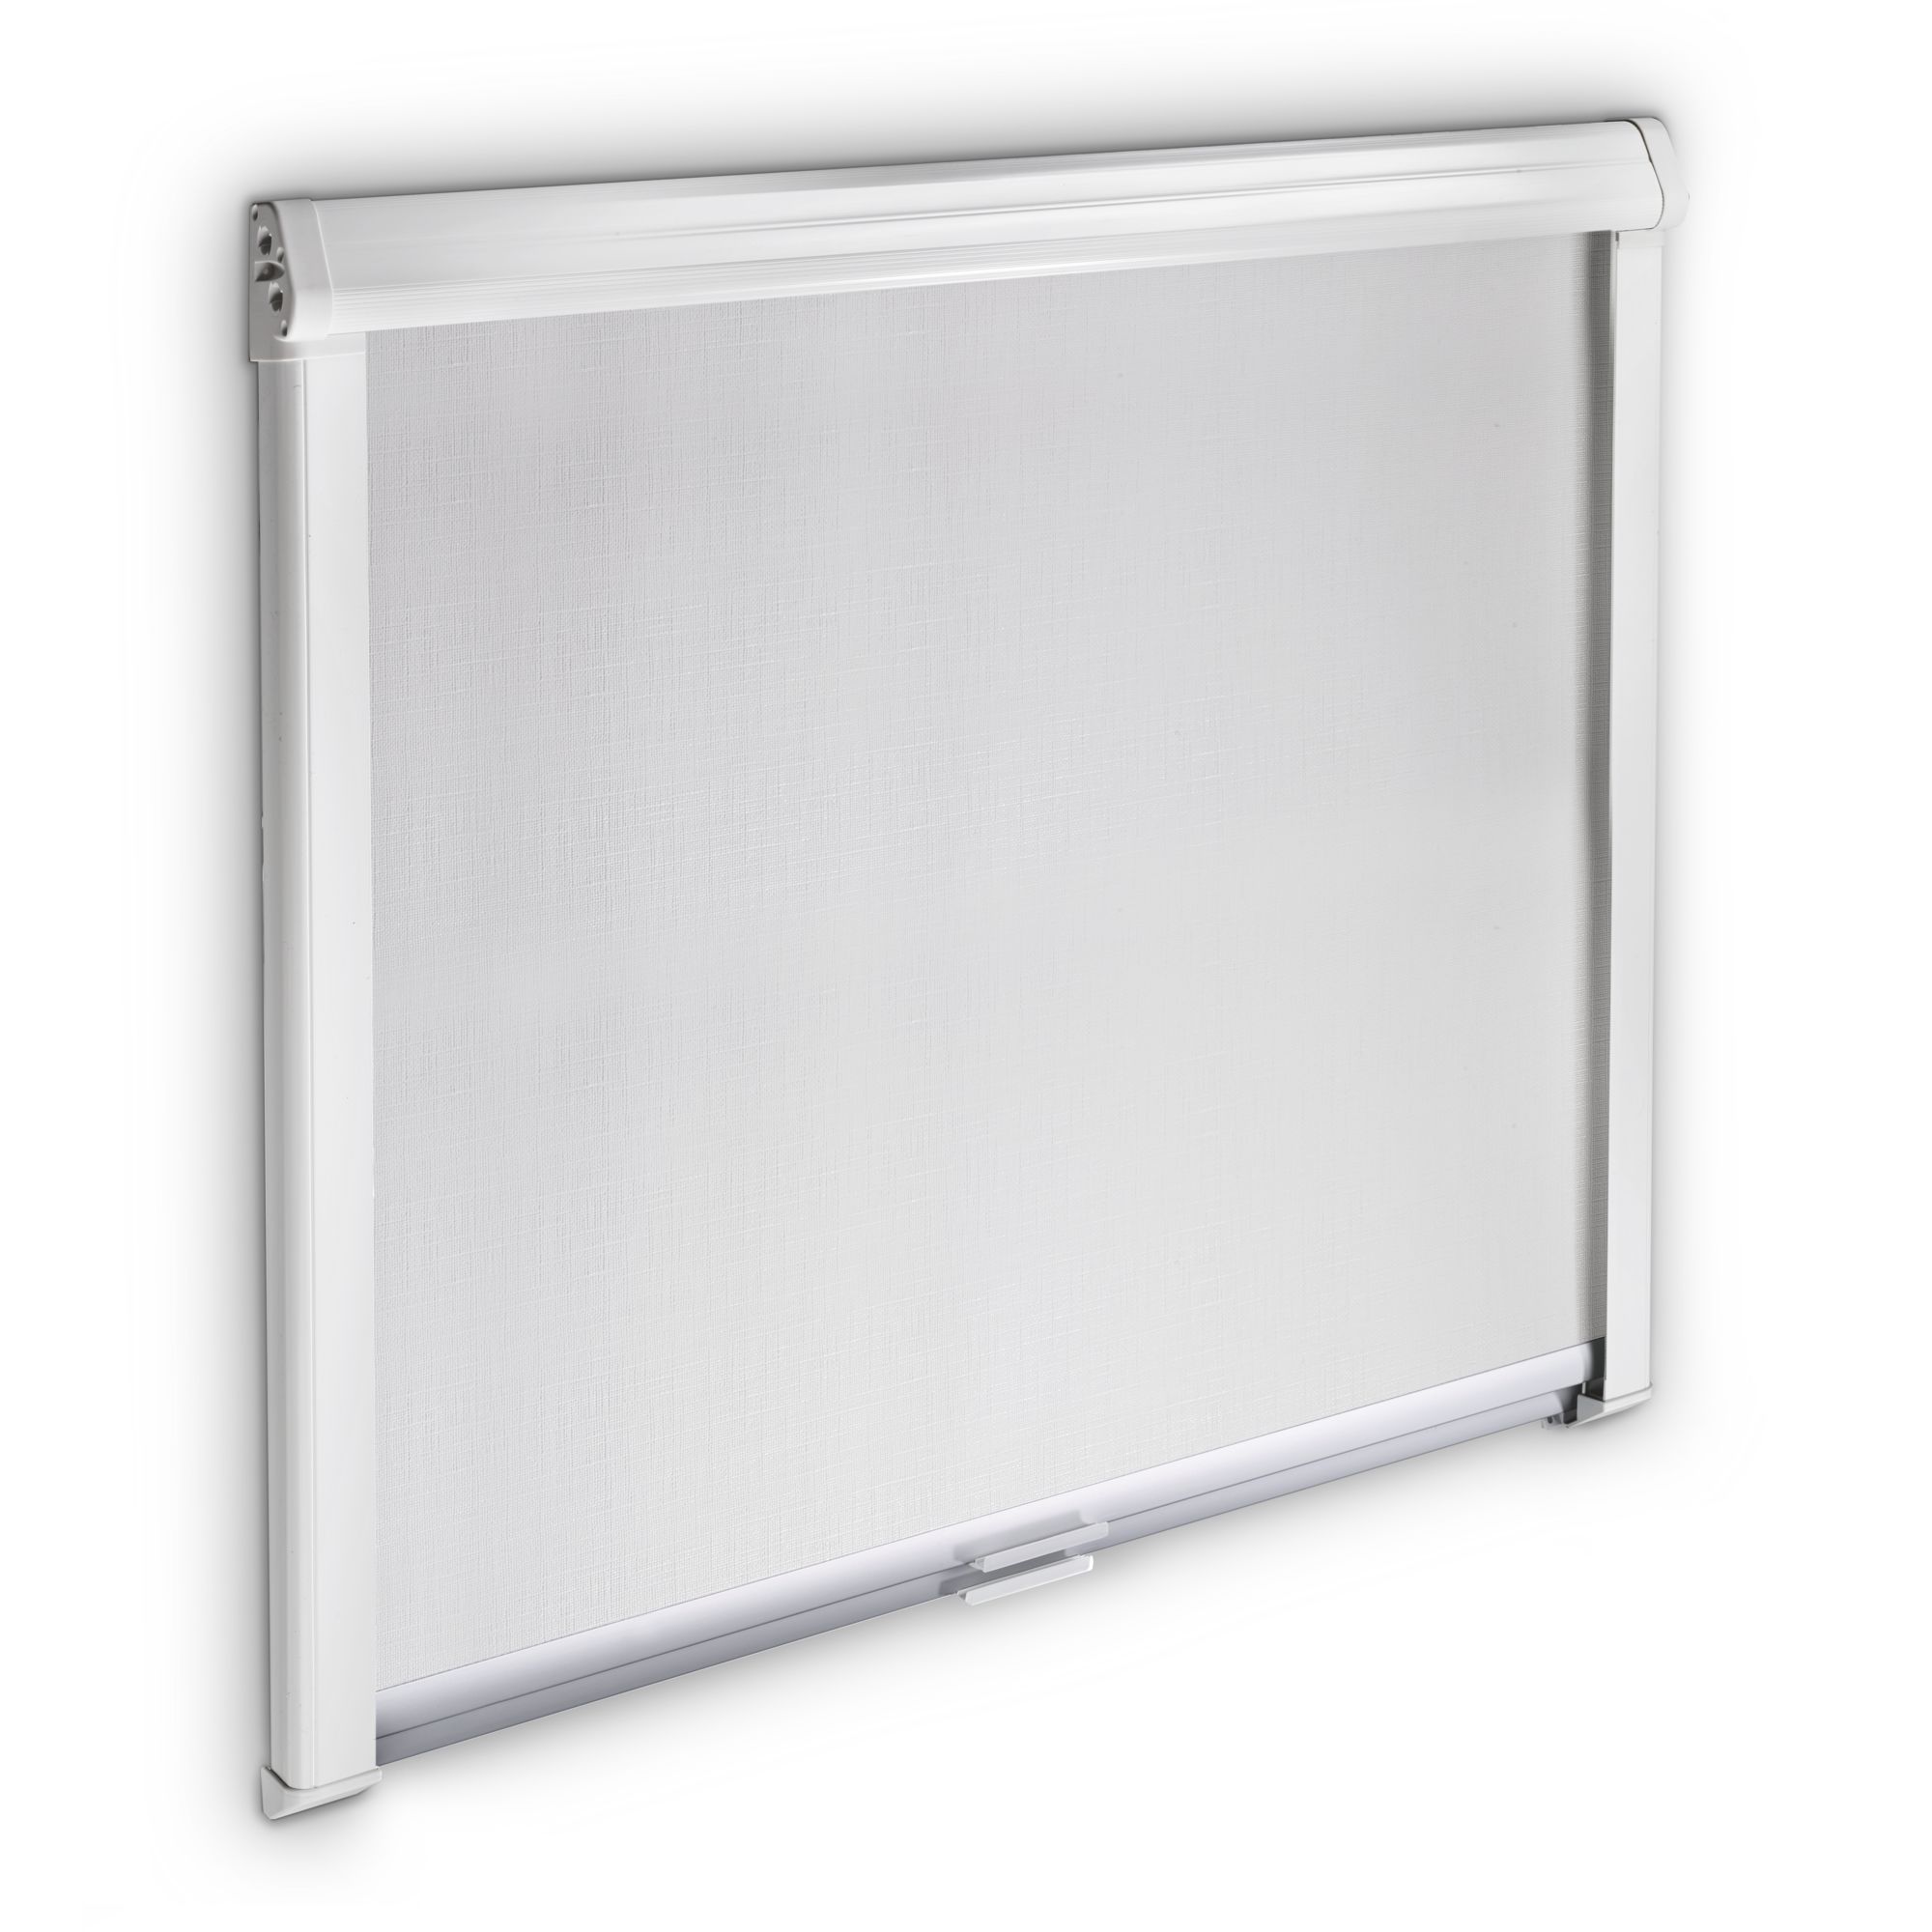 Dometic Black-Out Roller Blind 3000, 1460 x 810 mm, traffic-white